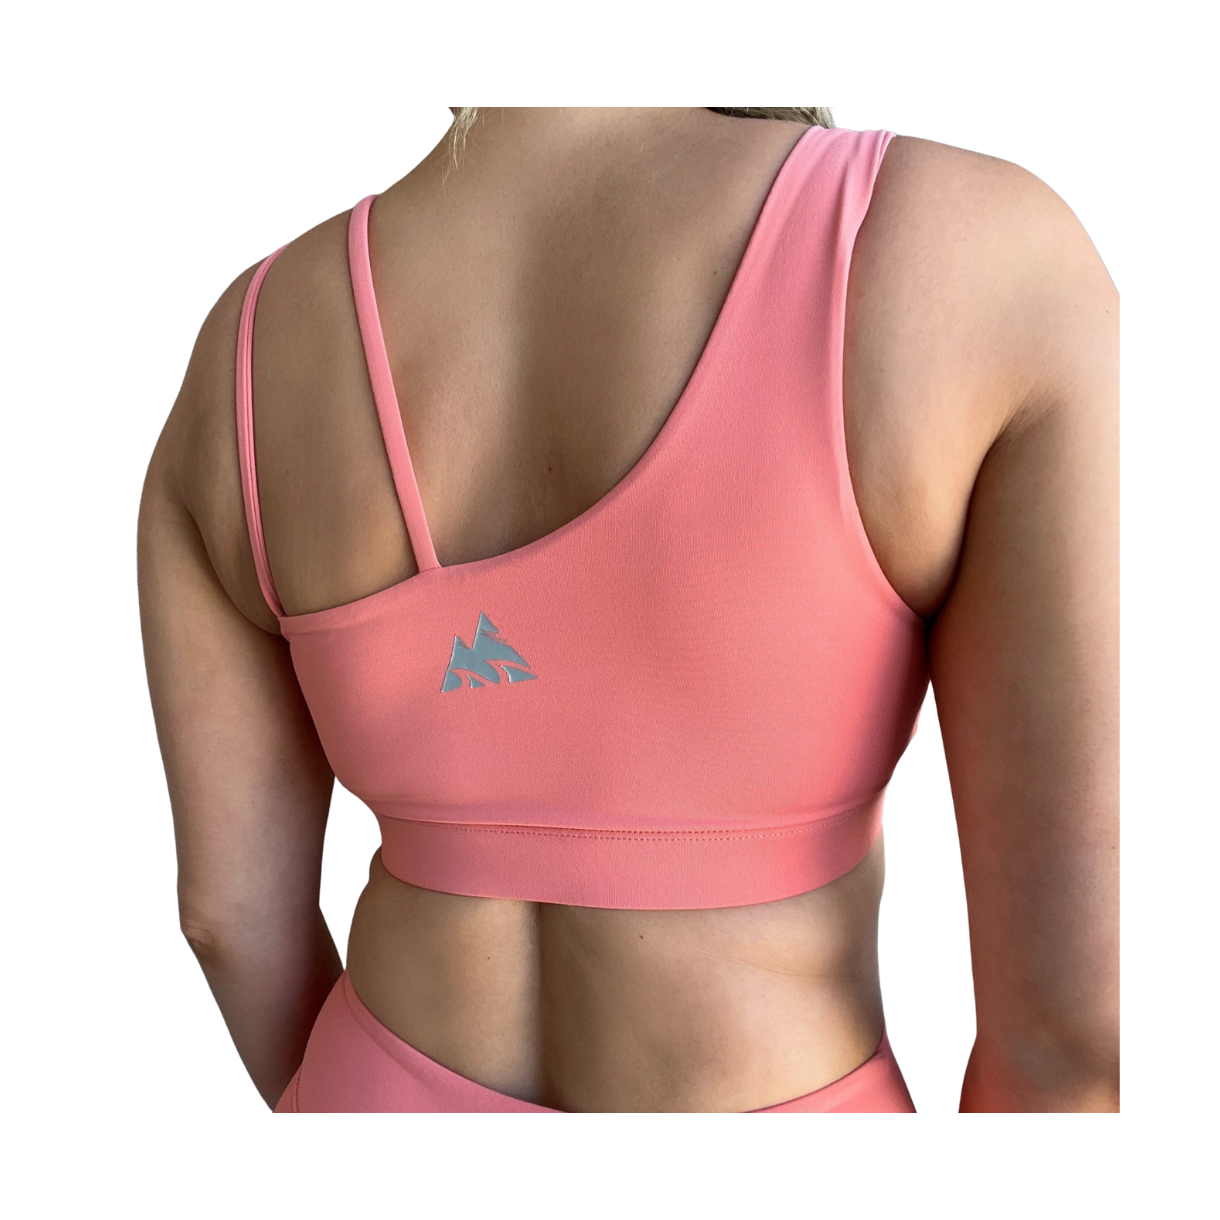 Coral asymmetrical sports bra with one thick strap and two thinner straps